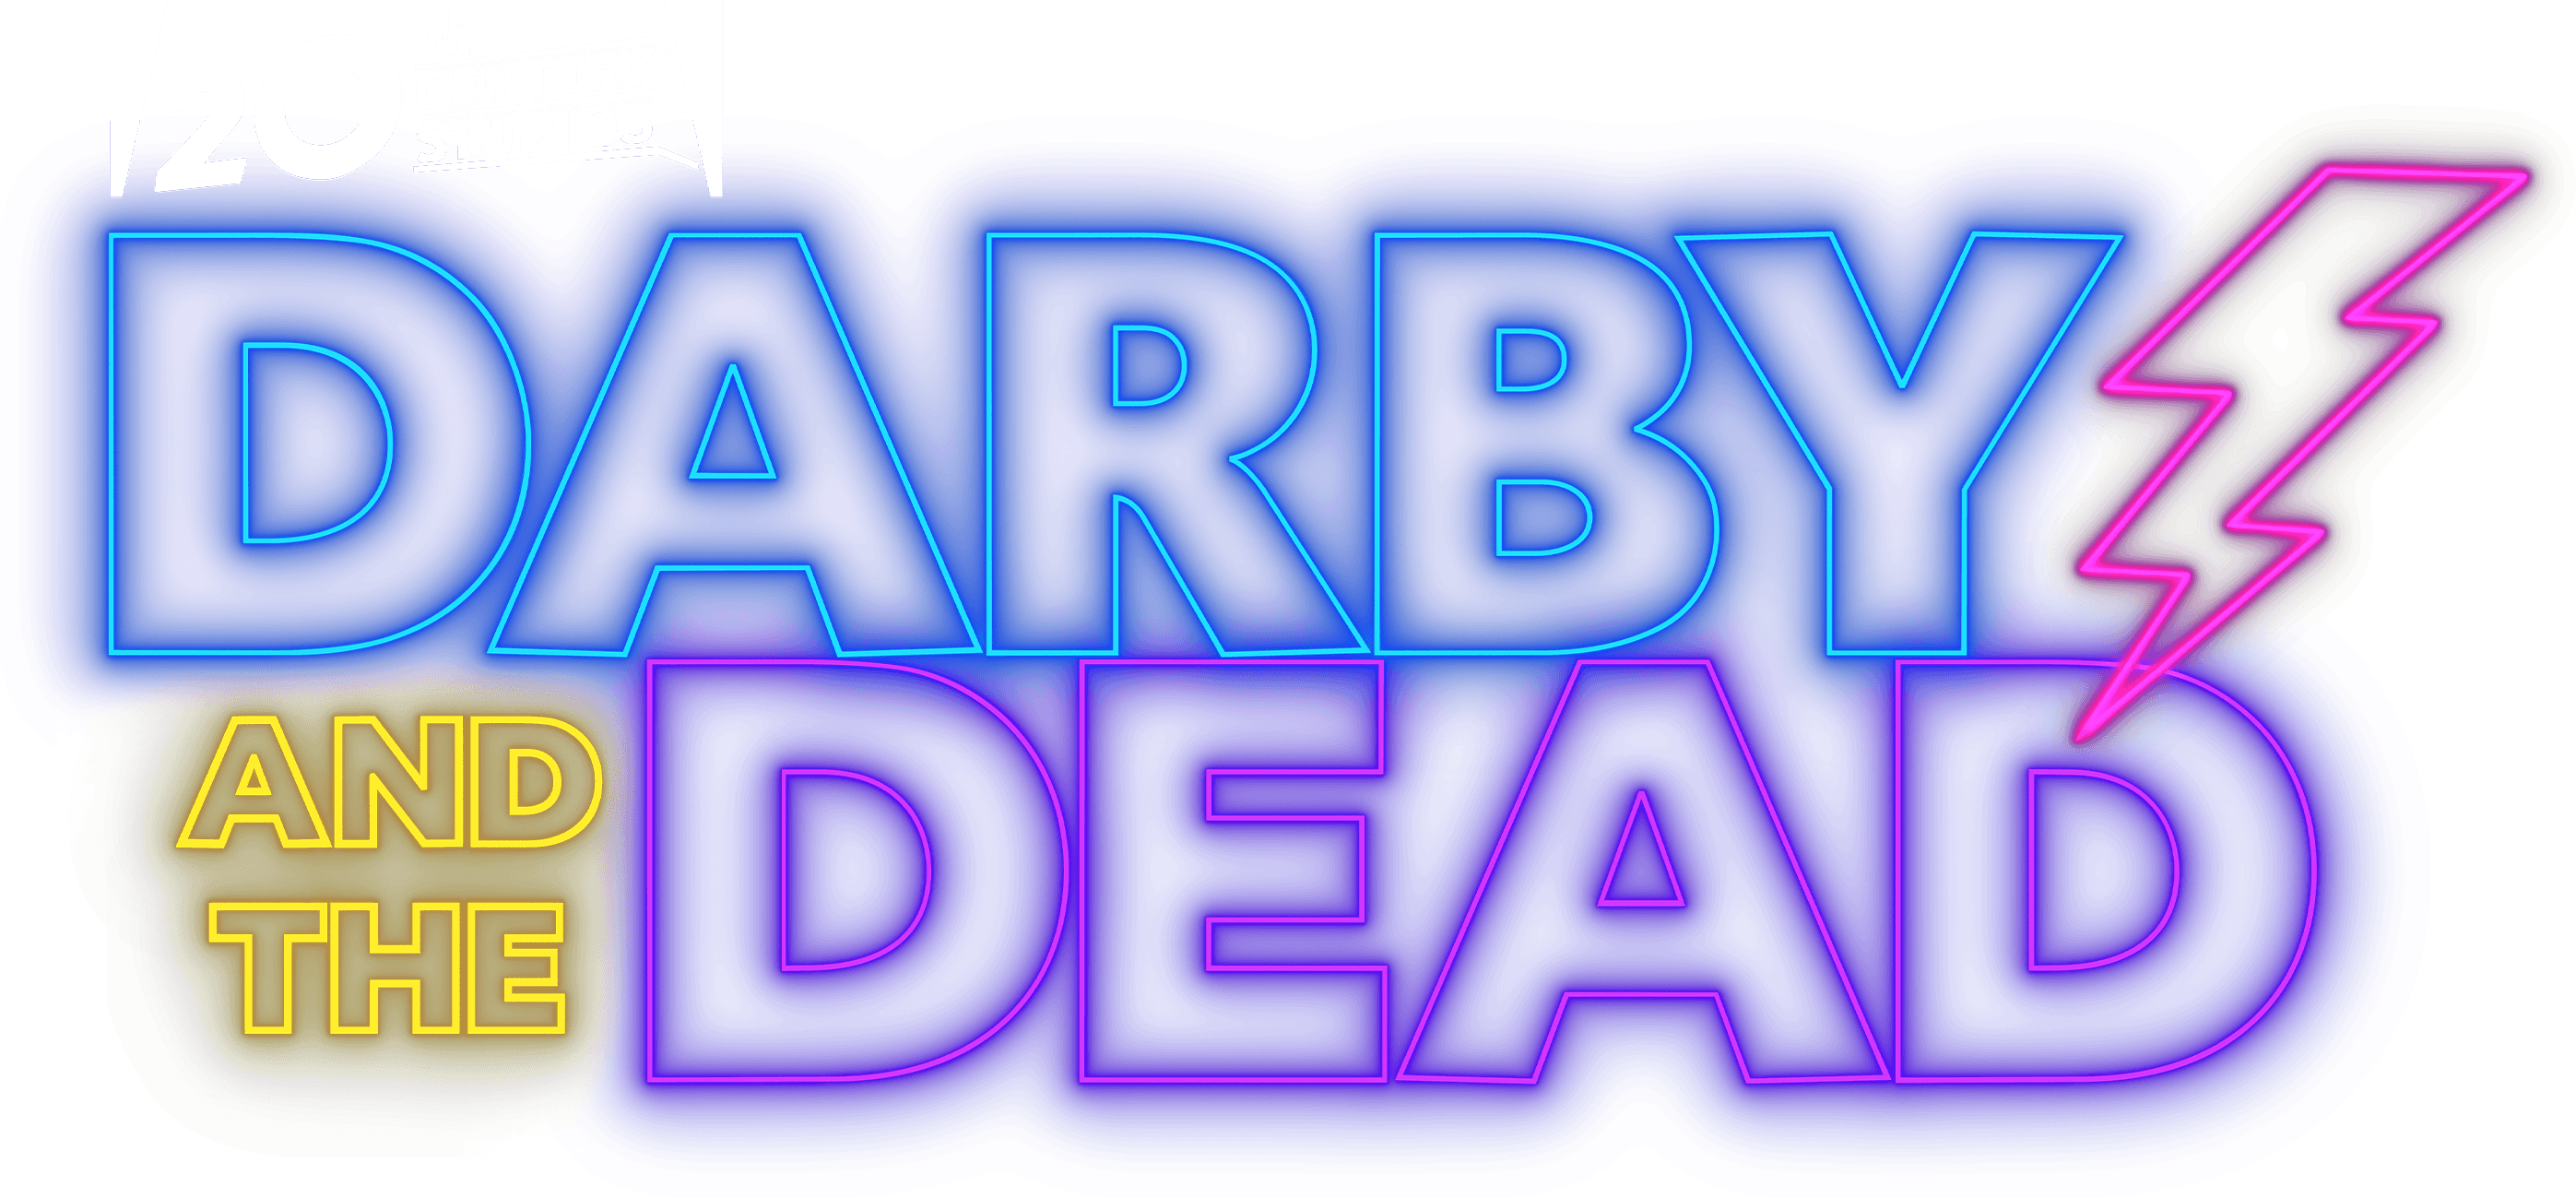 Darby and the Dead logo